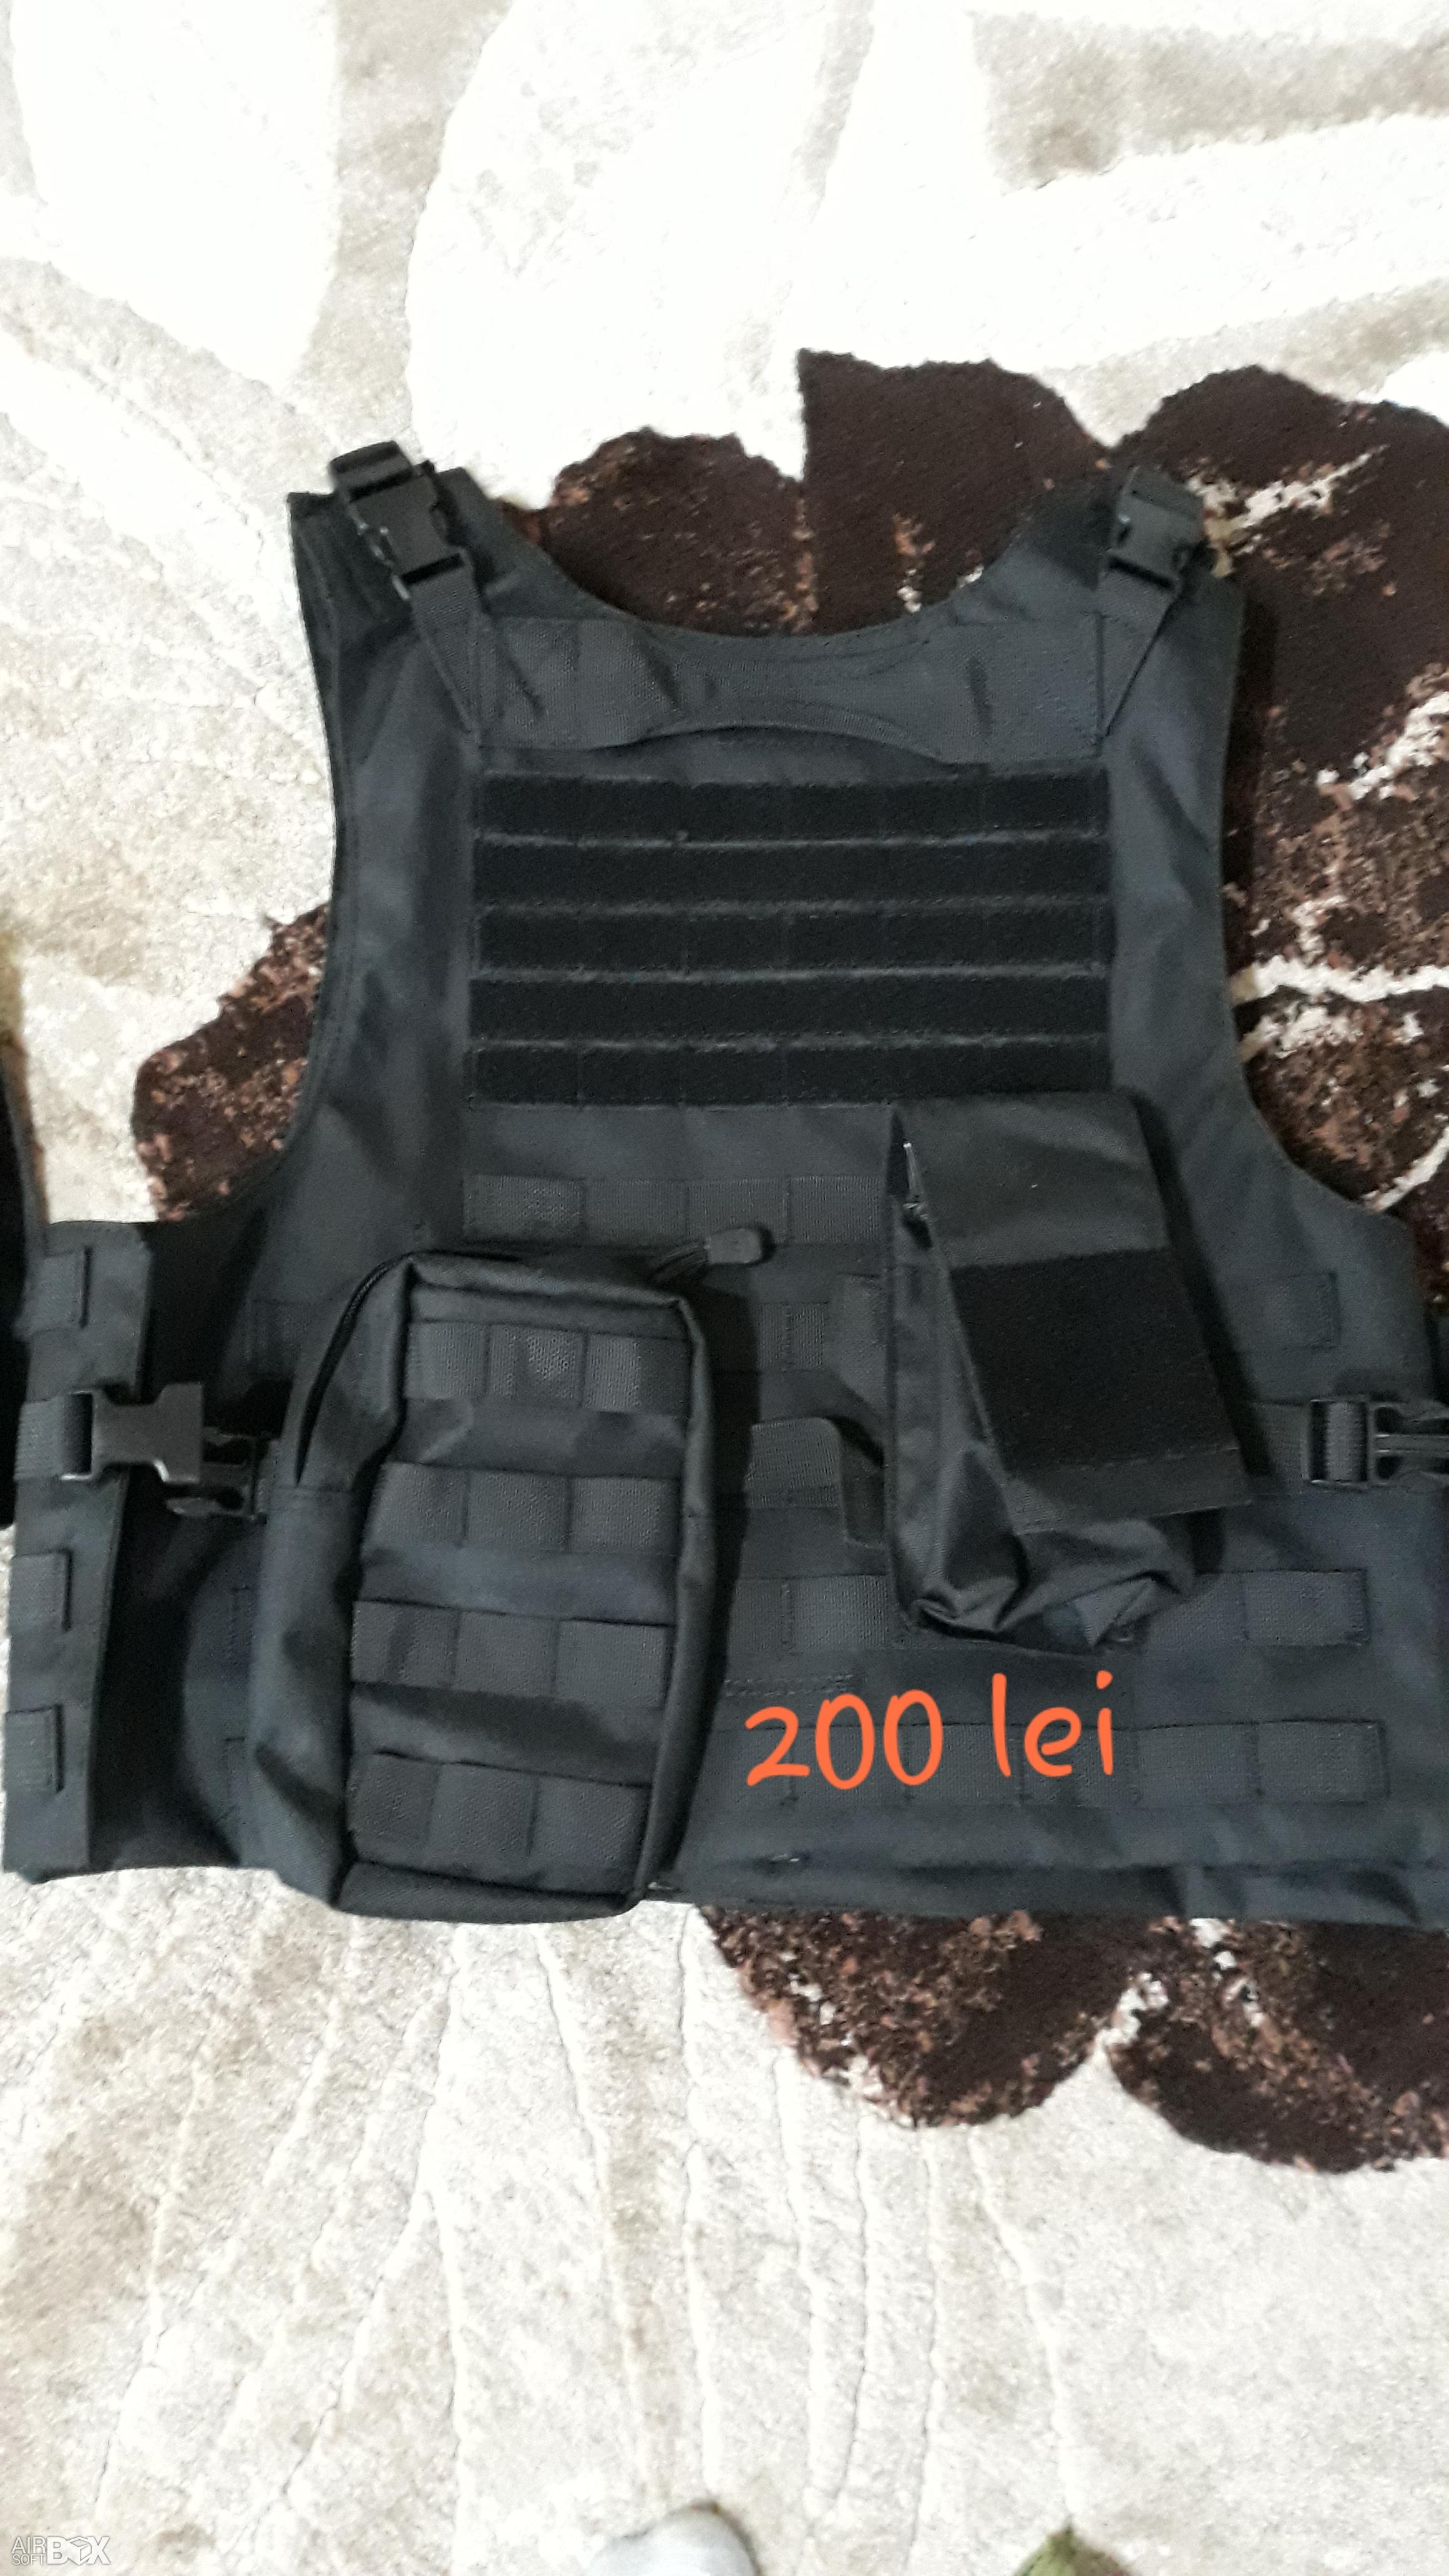 Palace darkness pawn Vand echipament airsoft.costum cryptech ,replica mp5 veste t... -  AirsoftBOX.ro